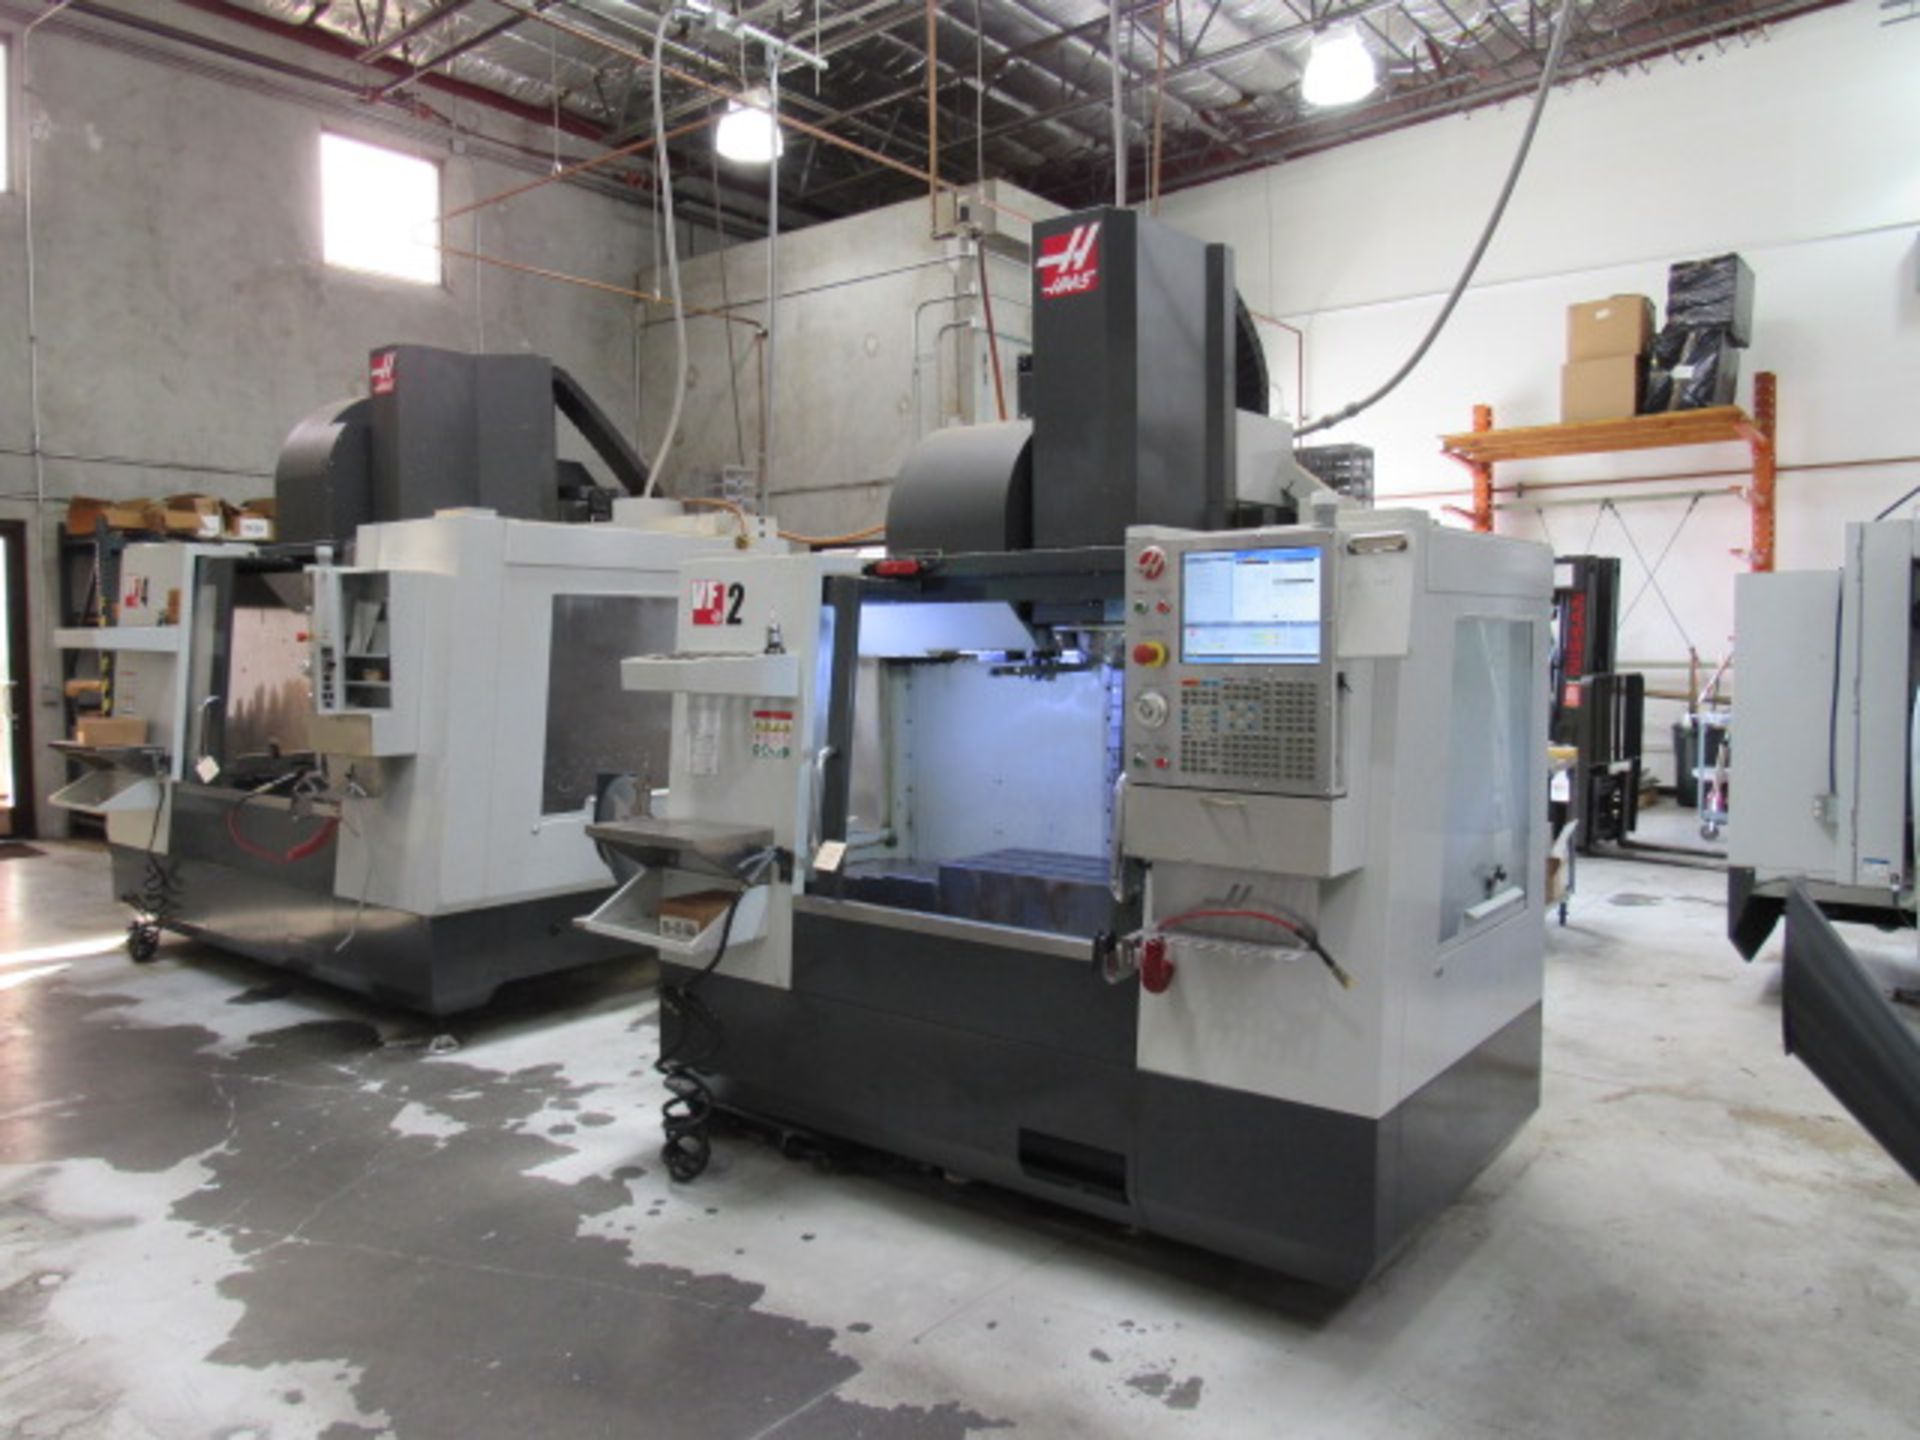 Haas VF2 CNC Vertical Machining Center - Image 7 of 9